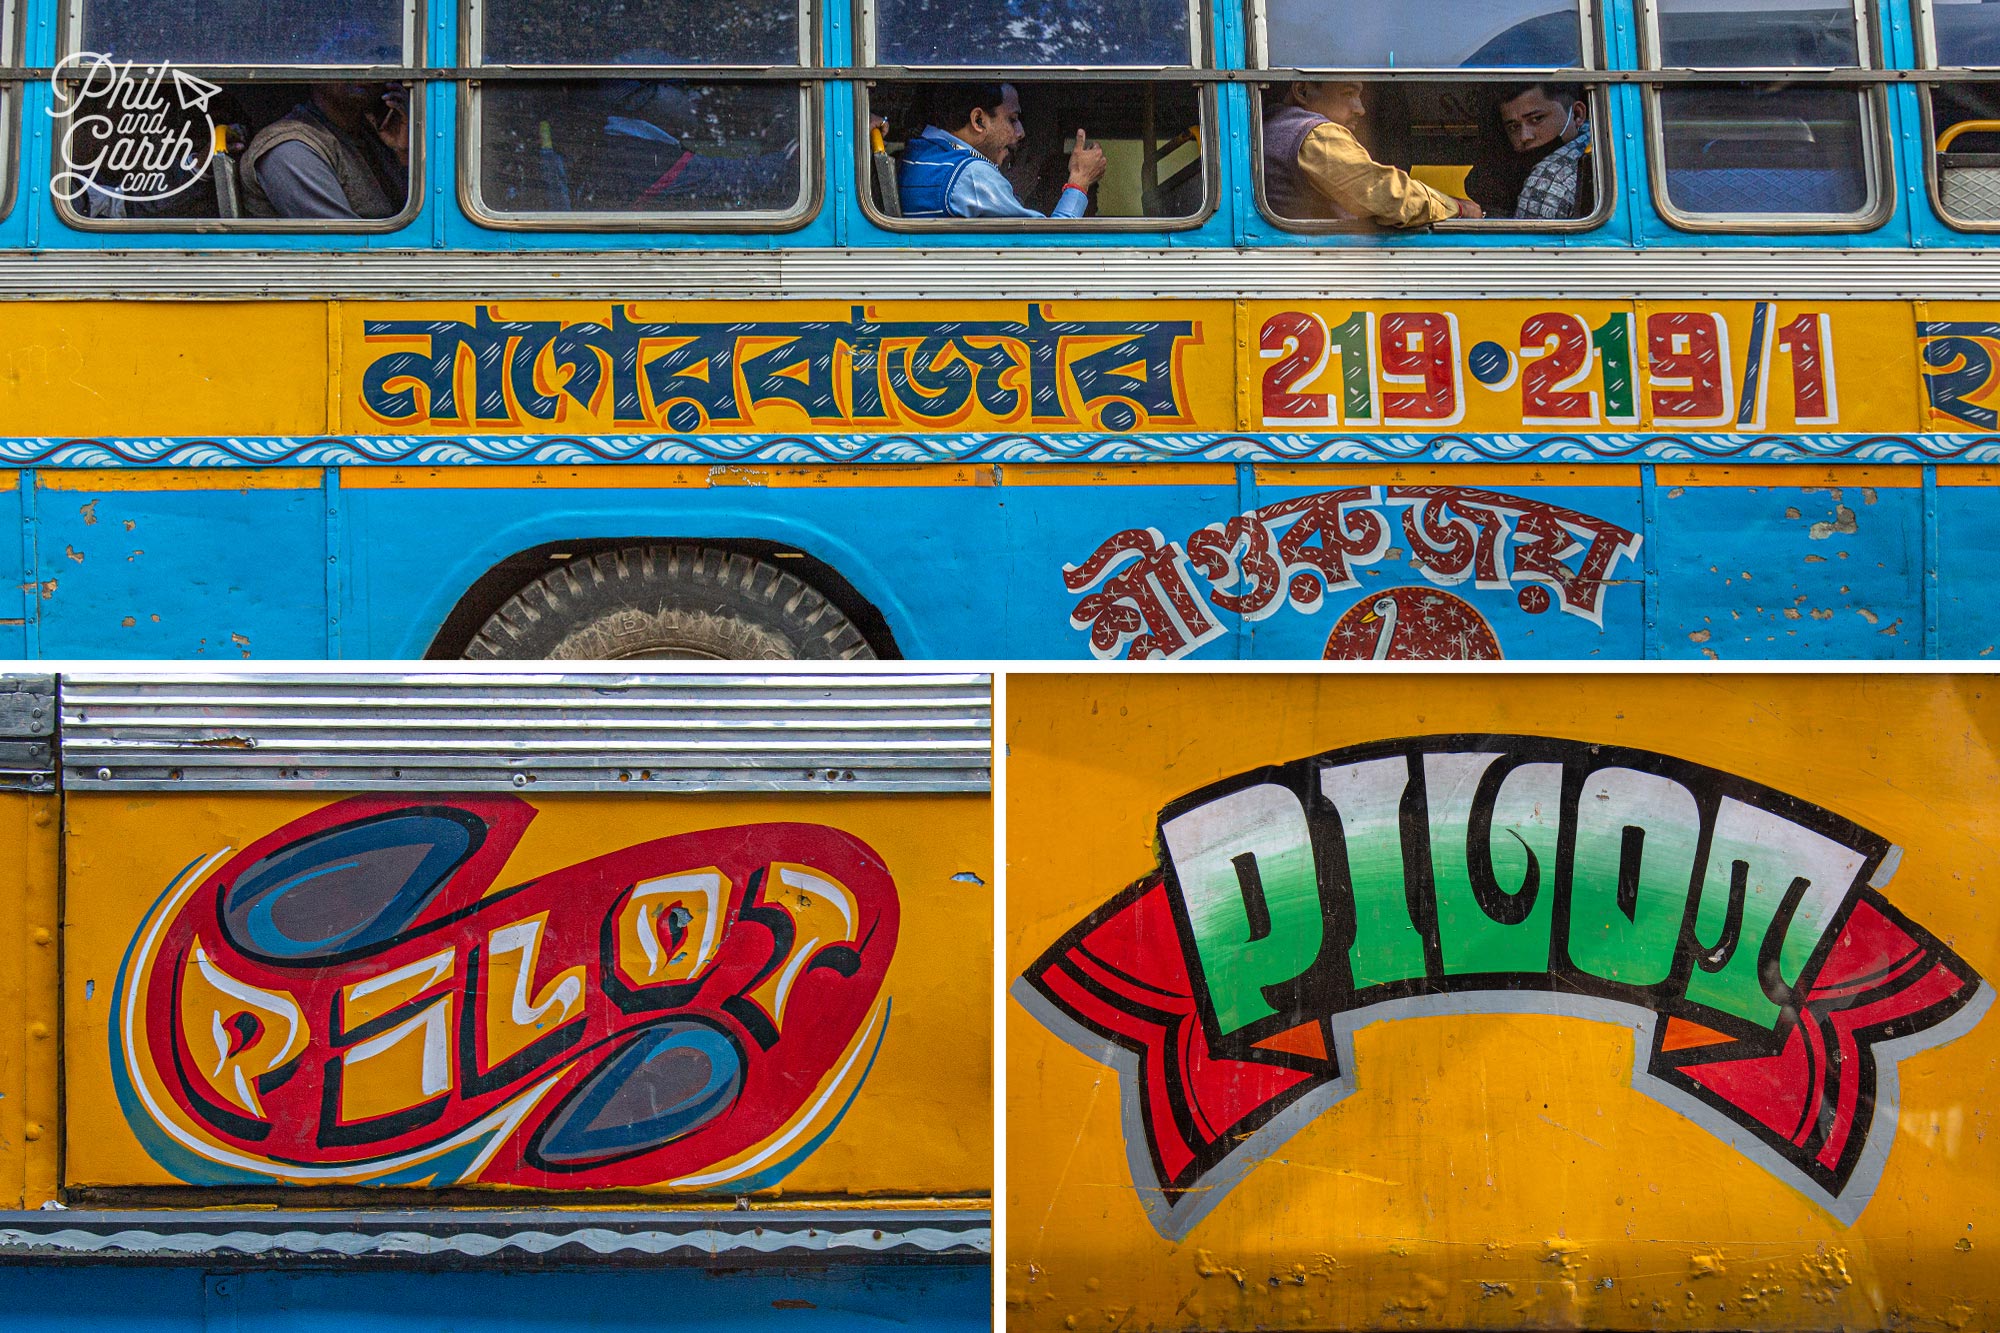 Loving the hand painted signs on the buses in Kolkata